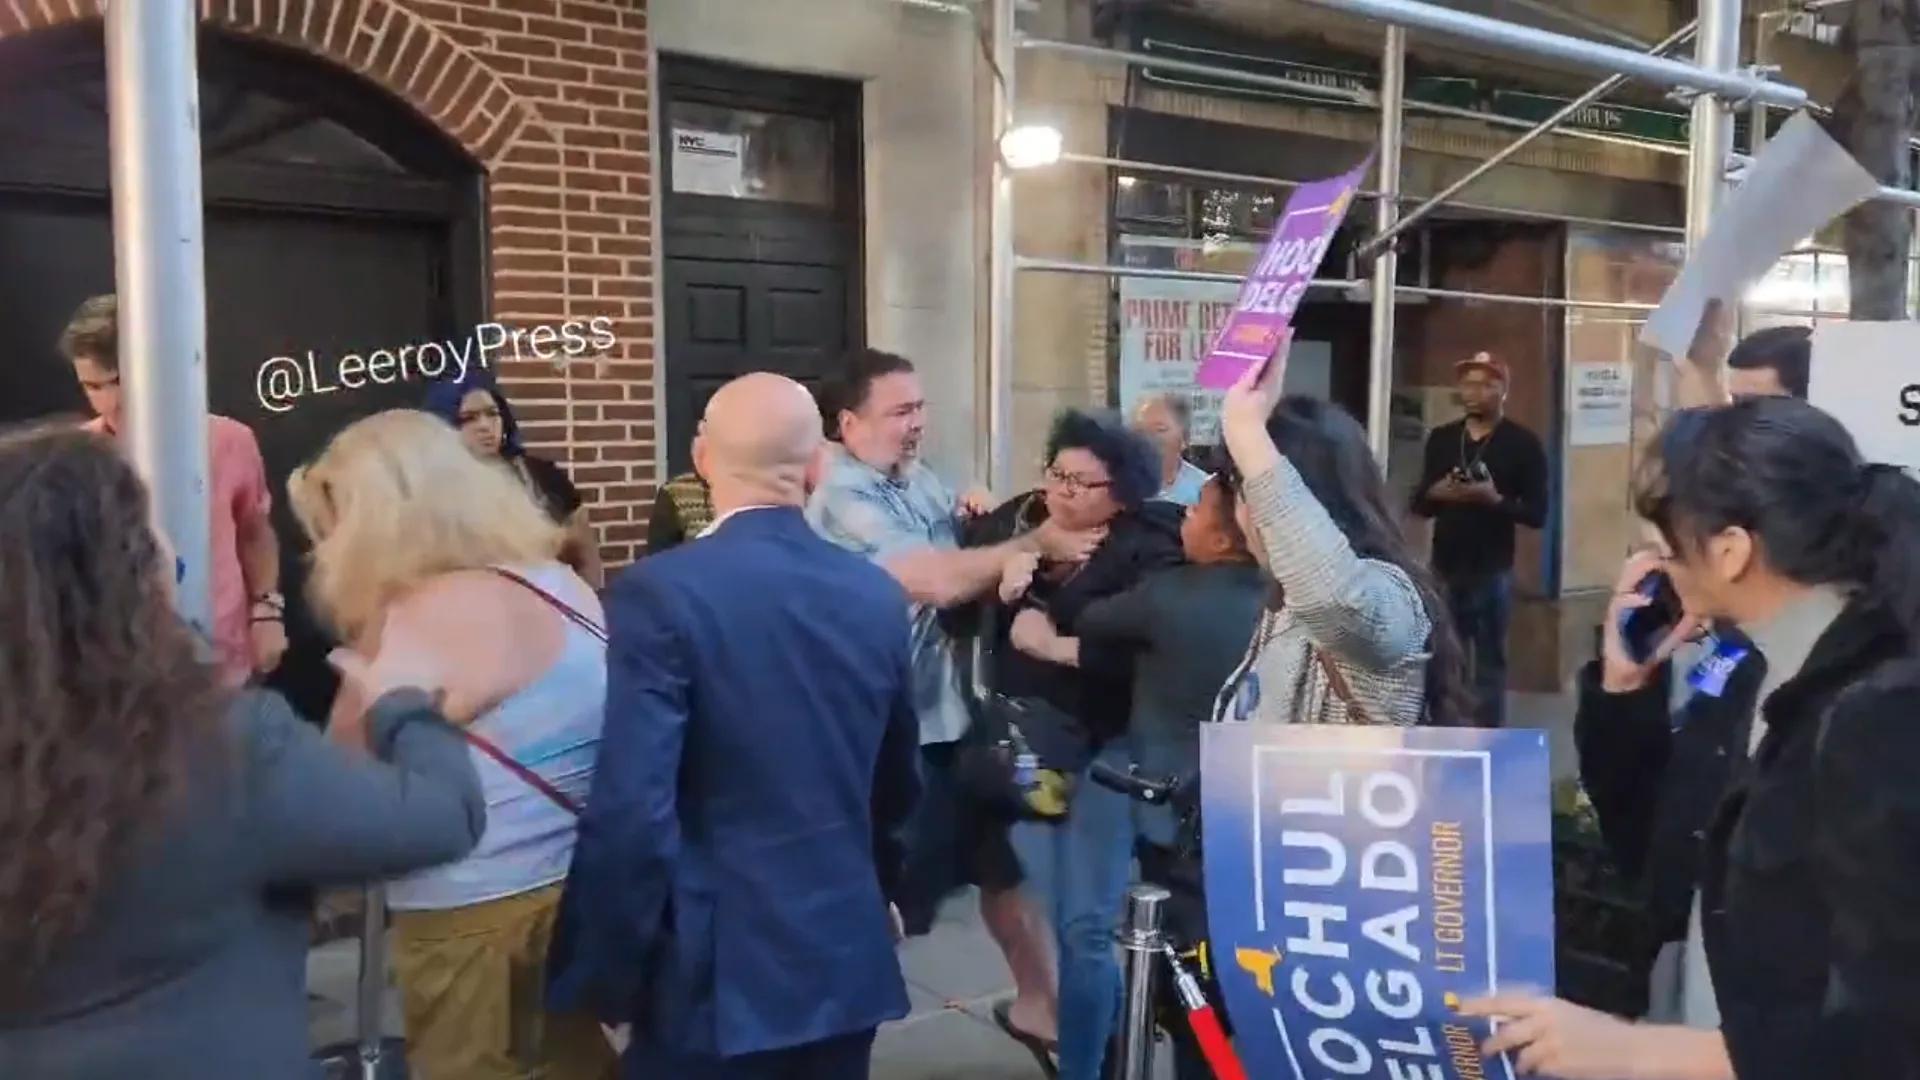 Hispanic woman assaulted, choked by male Hochul supporter at protest